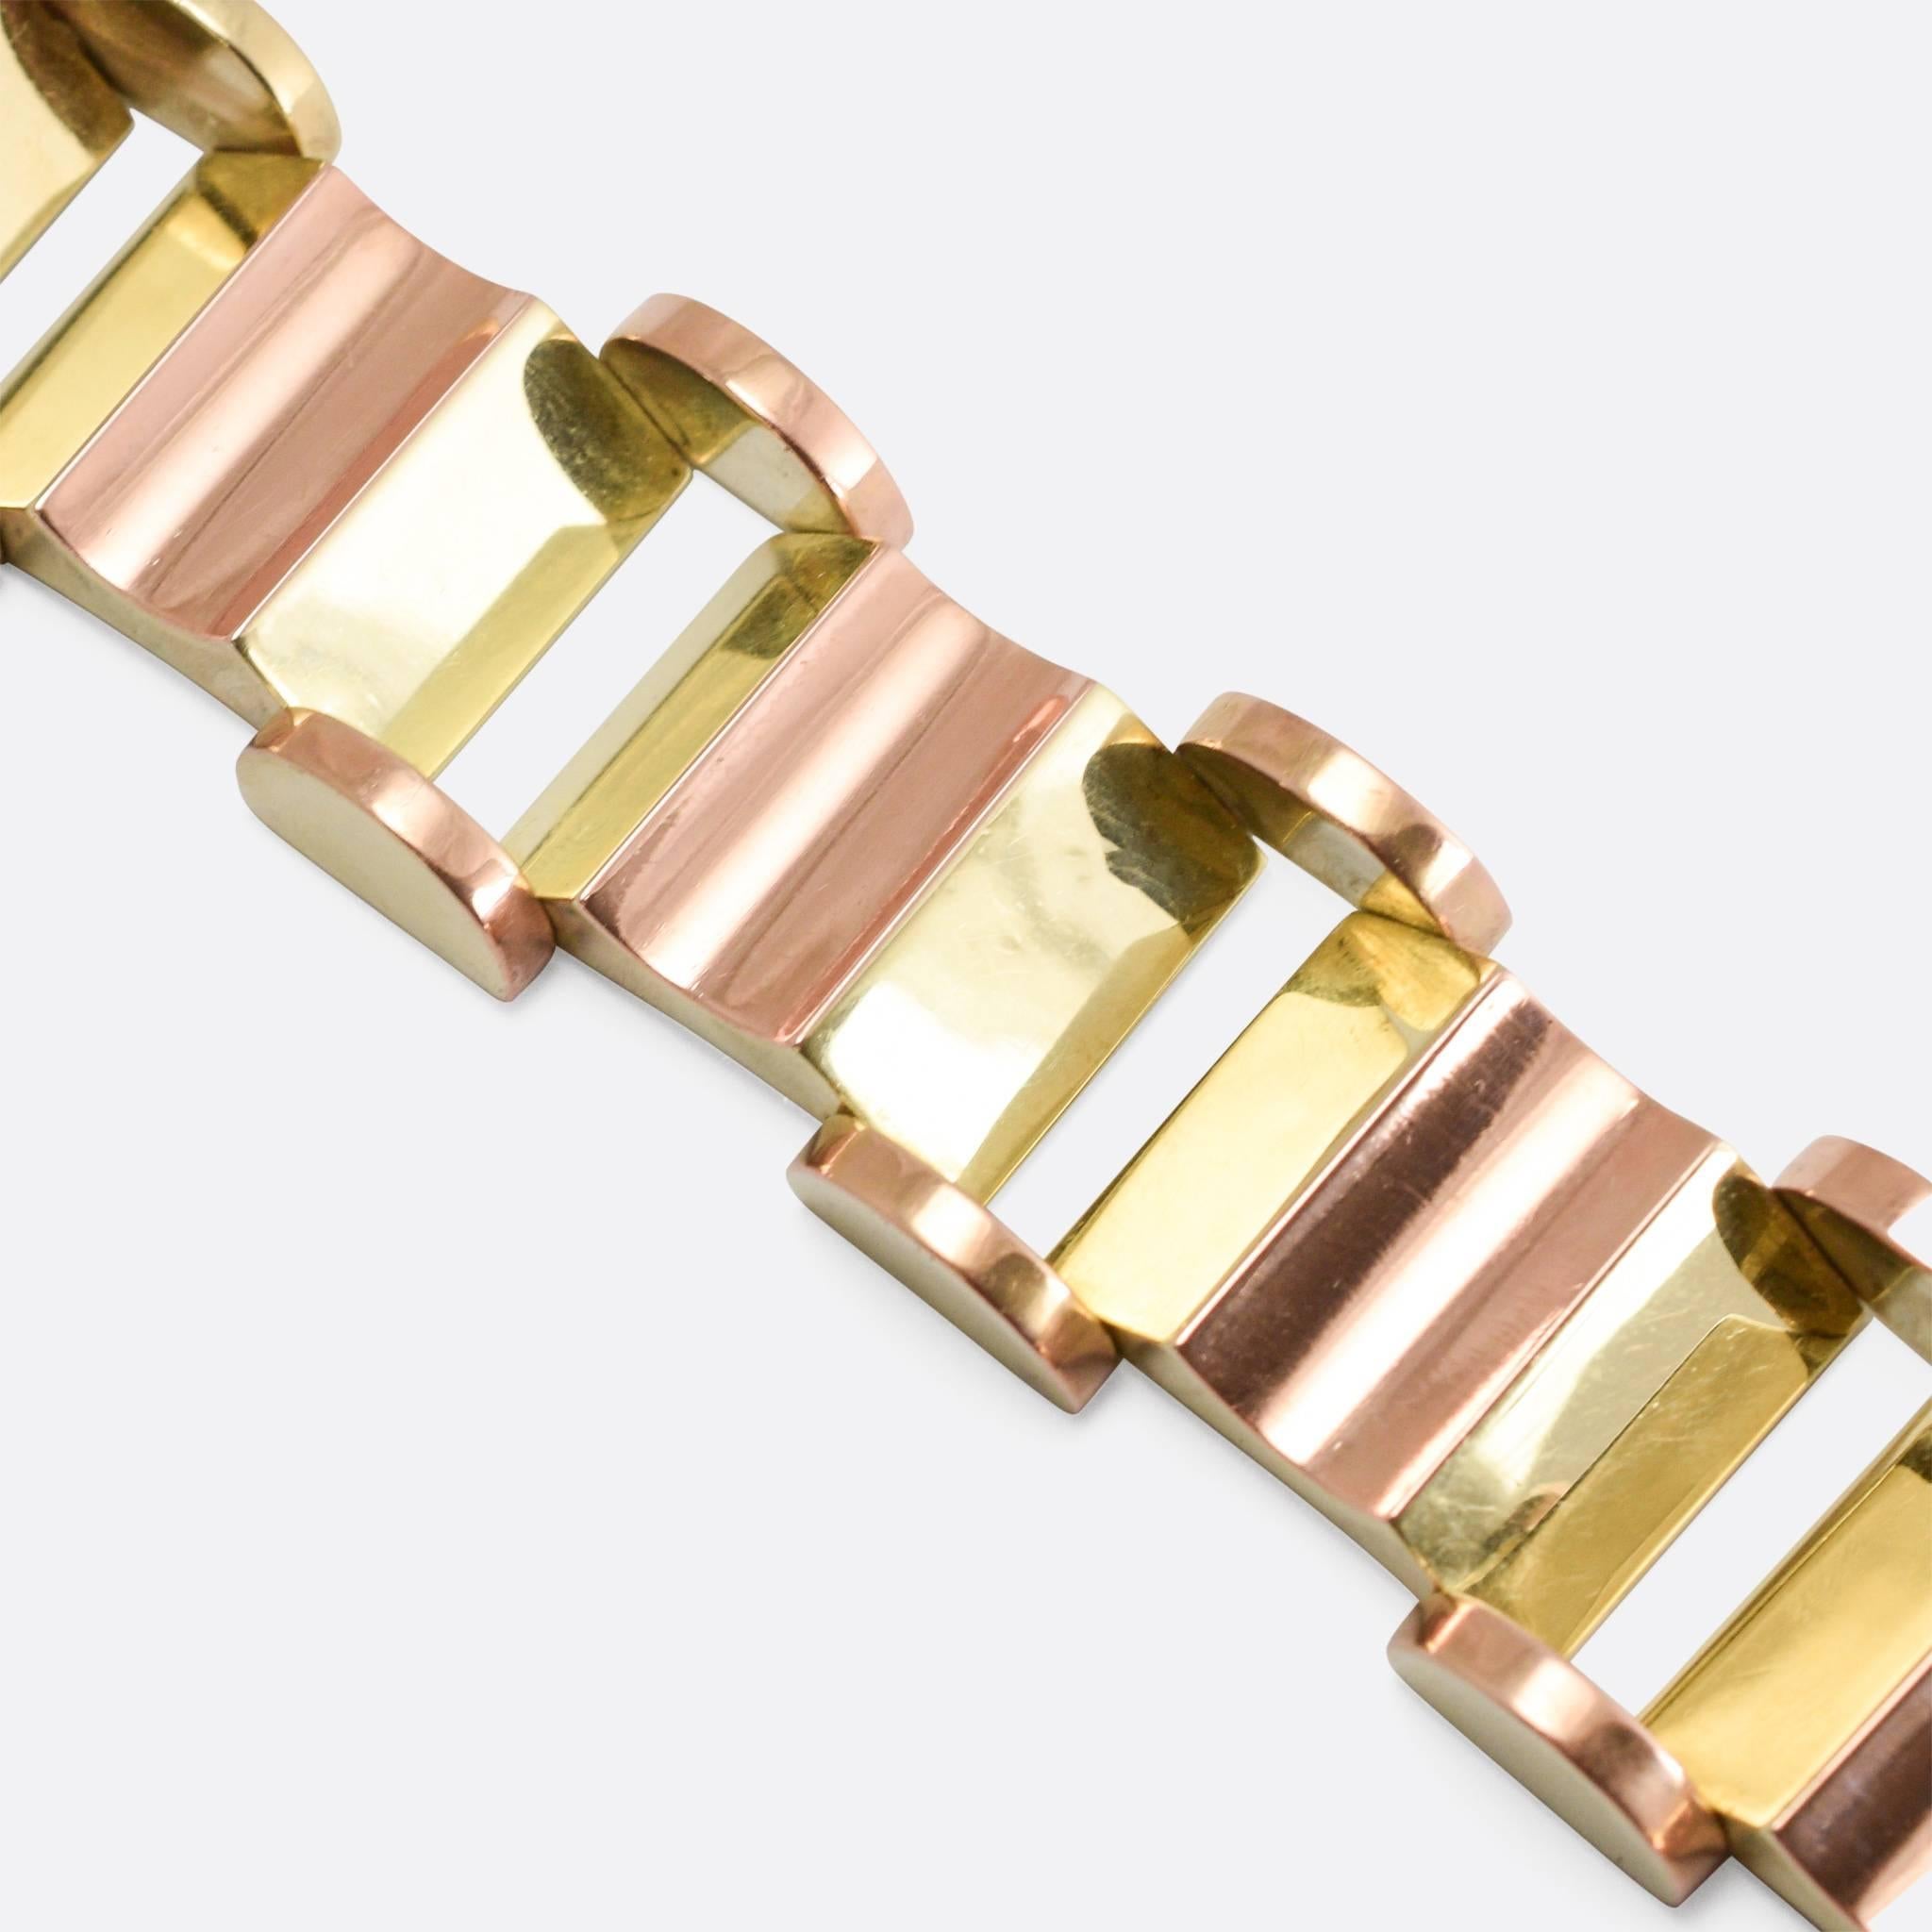 A cool 1940s chunky gold bracelet, with half moon and concave truncated pyramid motifs. Modelled in two-tone rose and yellow gold, the piece features the big and bold design associated with the Mid-Century / Retro style that developed in the fourth